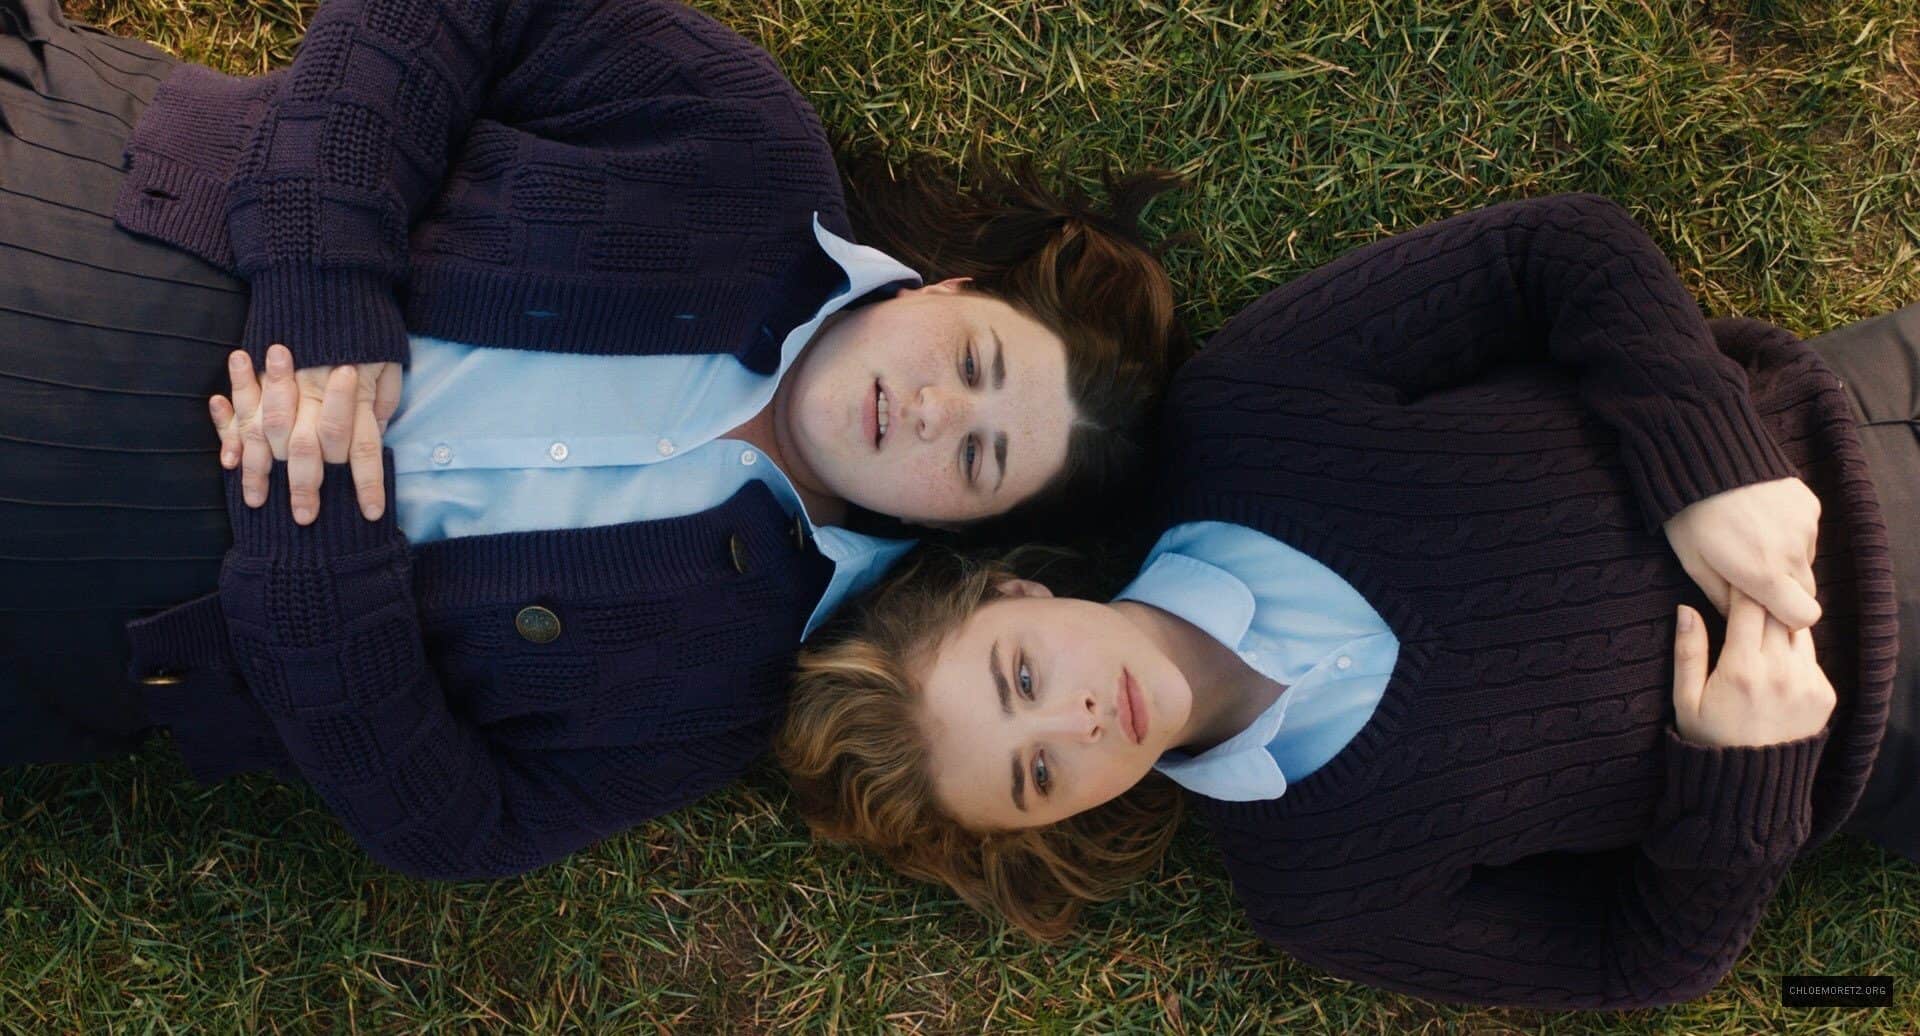 Chloë Grace Moretz and Melanie Ehrlich in The Miseducation of Cameron Post